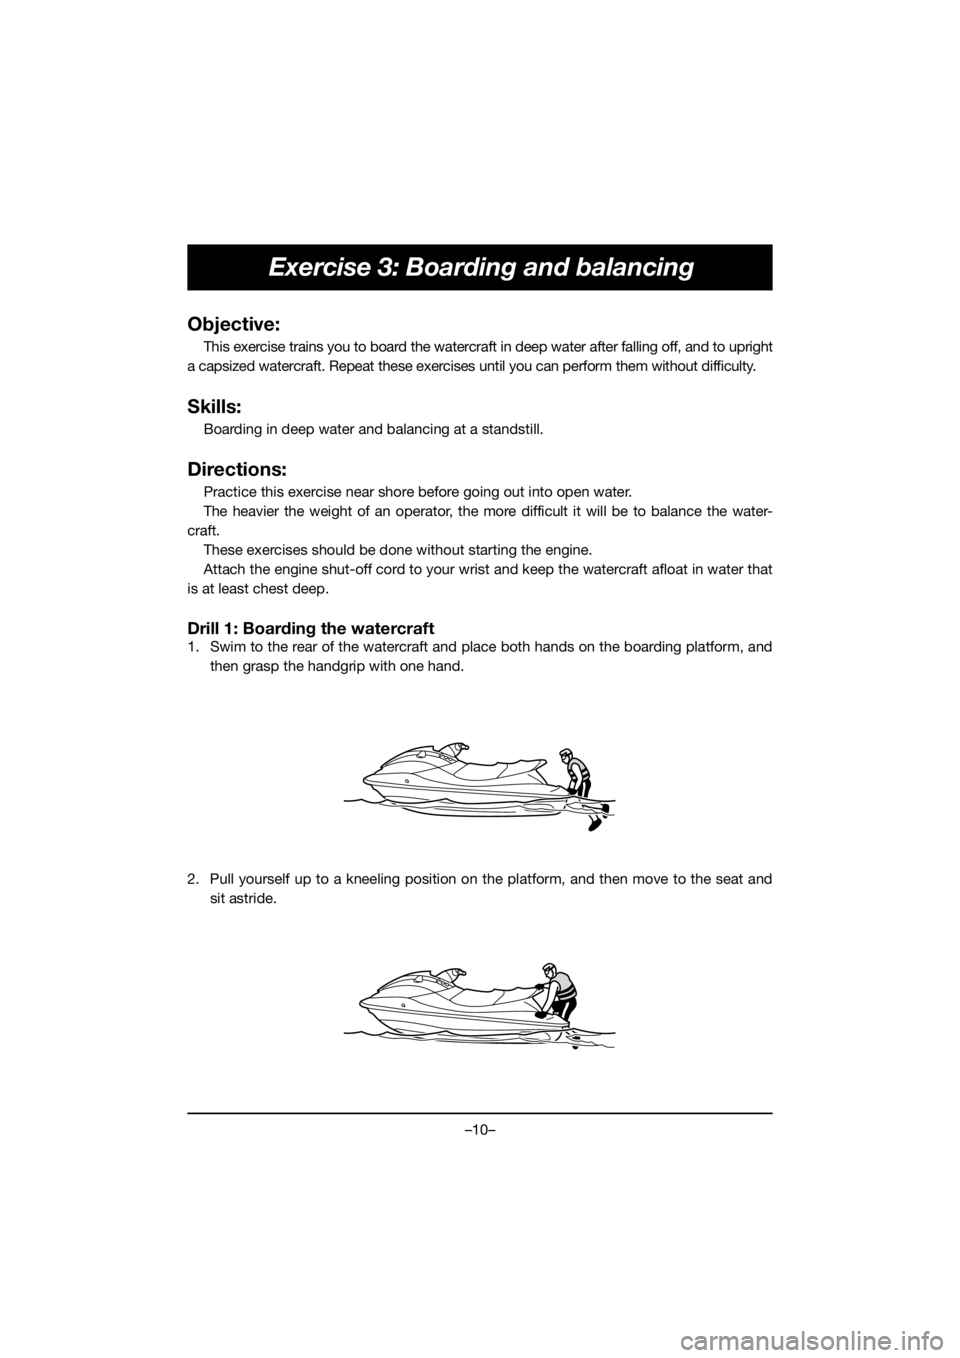 YAMAHA EXR 2020  Owners Manual –10–
Exercise 3: Boarding and balancing
Objective:
This exercise trains you to board the watercraft in deep water after falling off, and to upright
a capsized watercraft. Repeat these exercises un